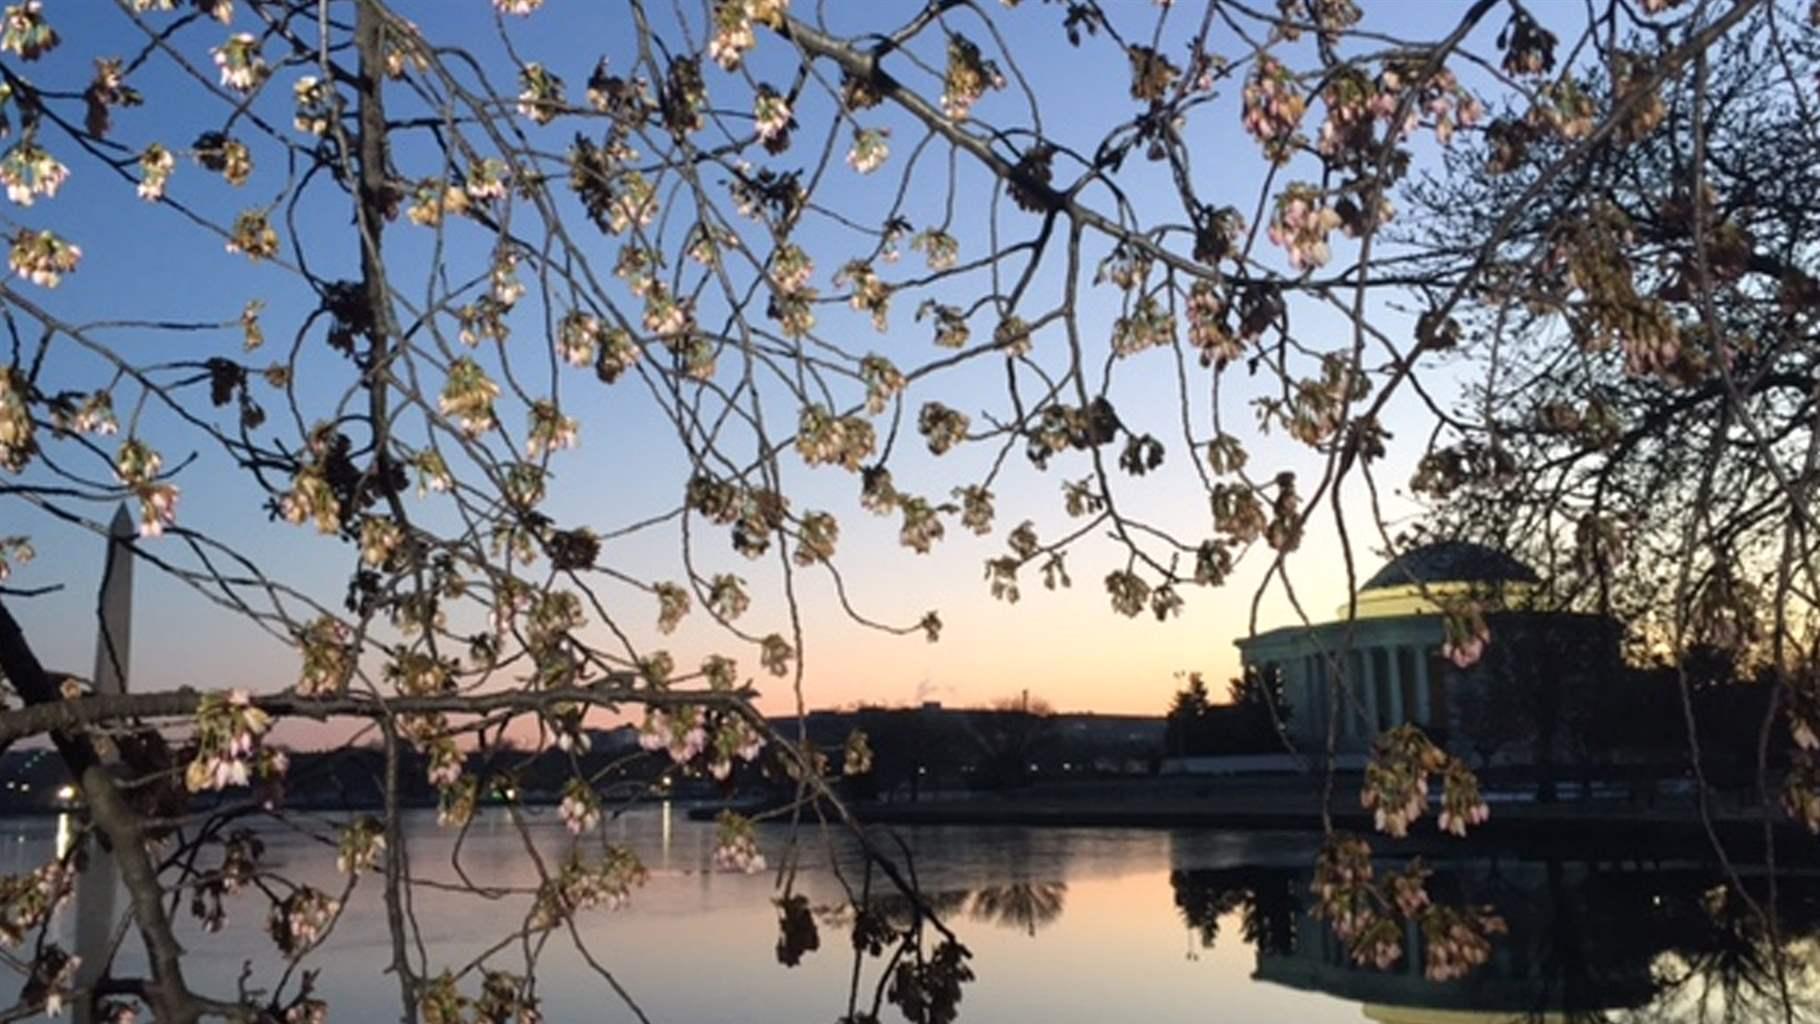 The Tidal Basin provides a picturesque vista for the blossoms, but it is also threatening some of the trees.